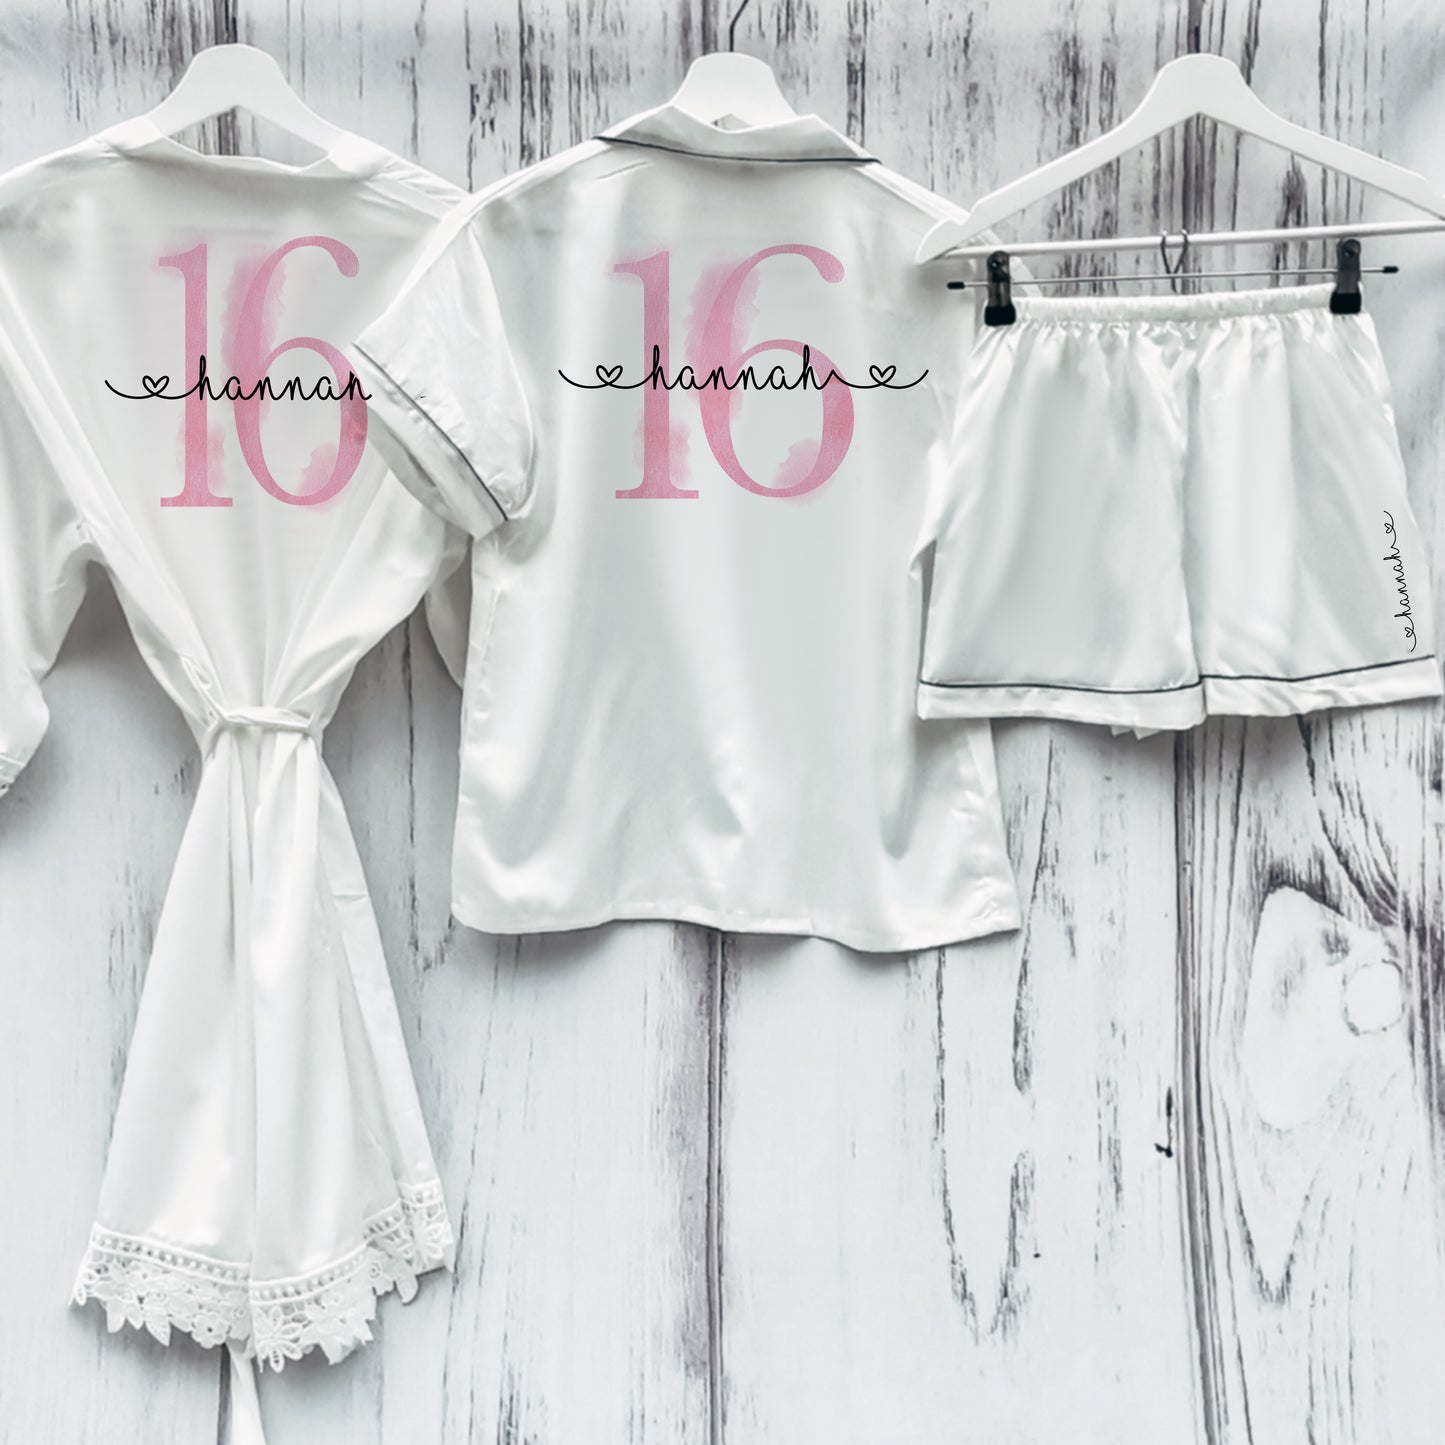 A set of stylish, customized pajamas and robe for a 16th birthday celebration, featuring elegant design elements and the number prominently displayed